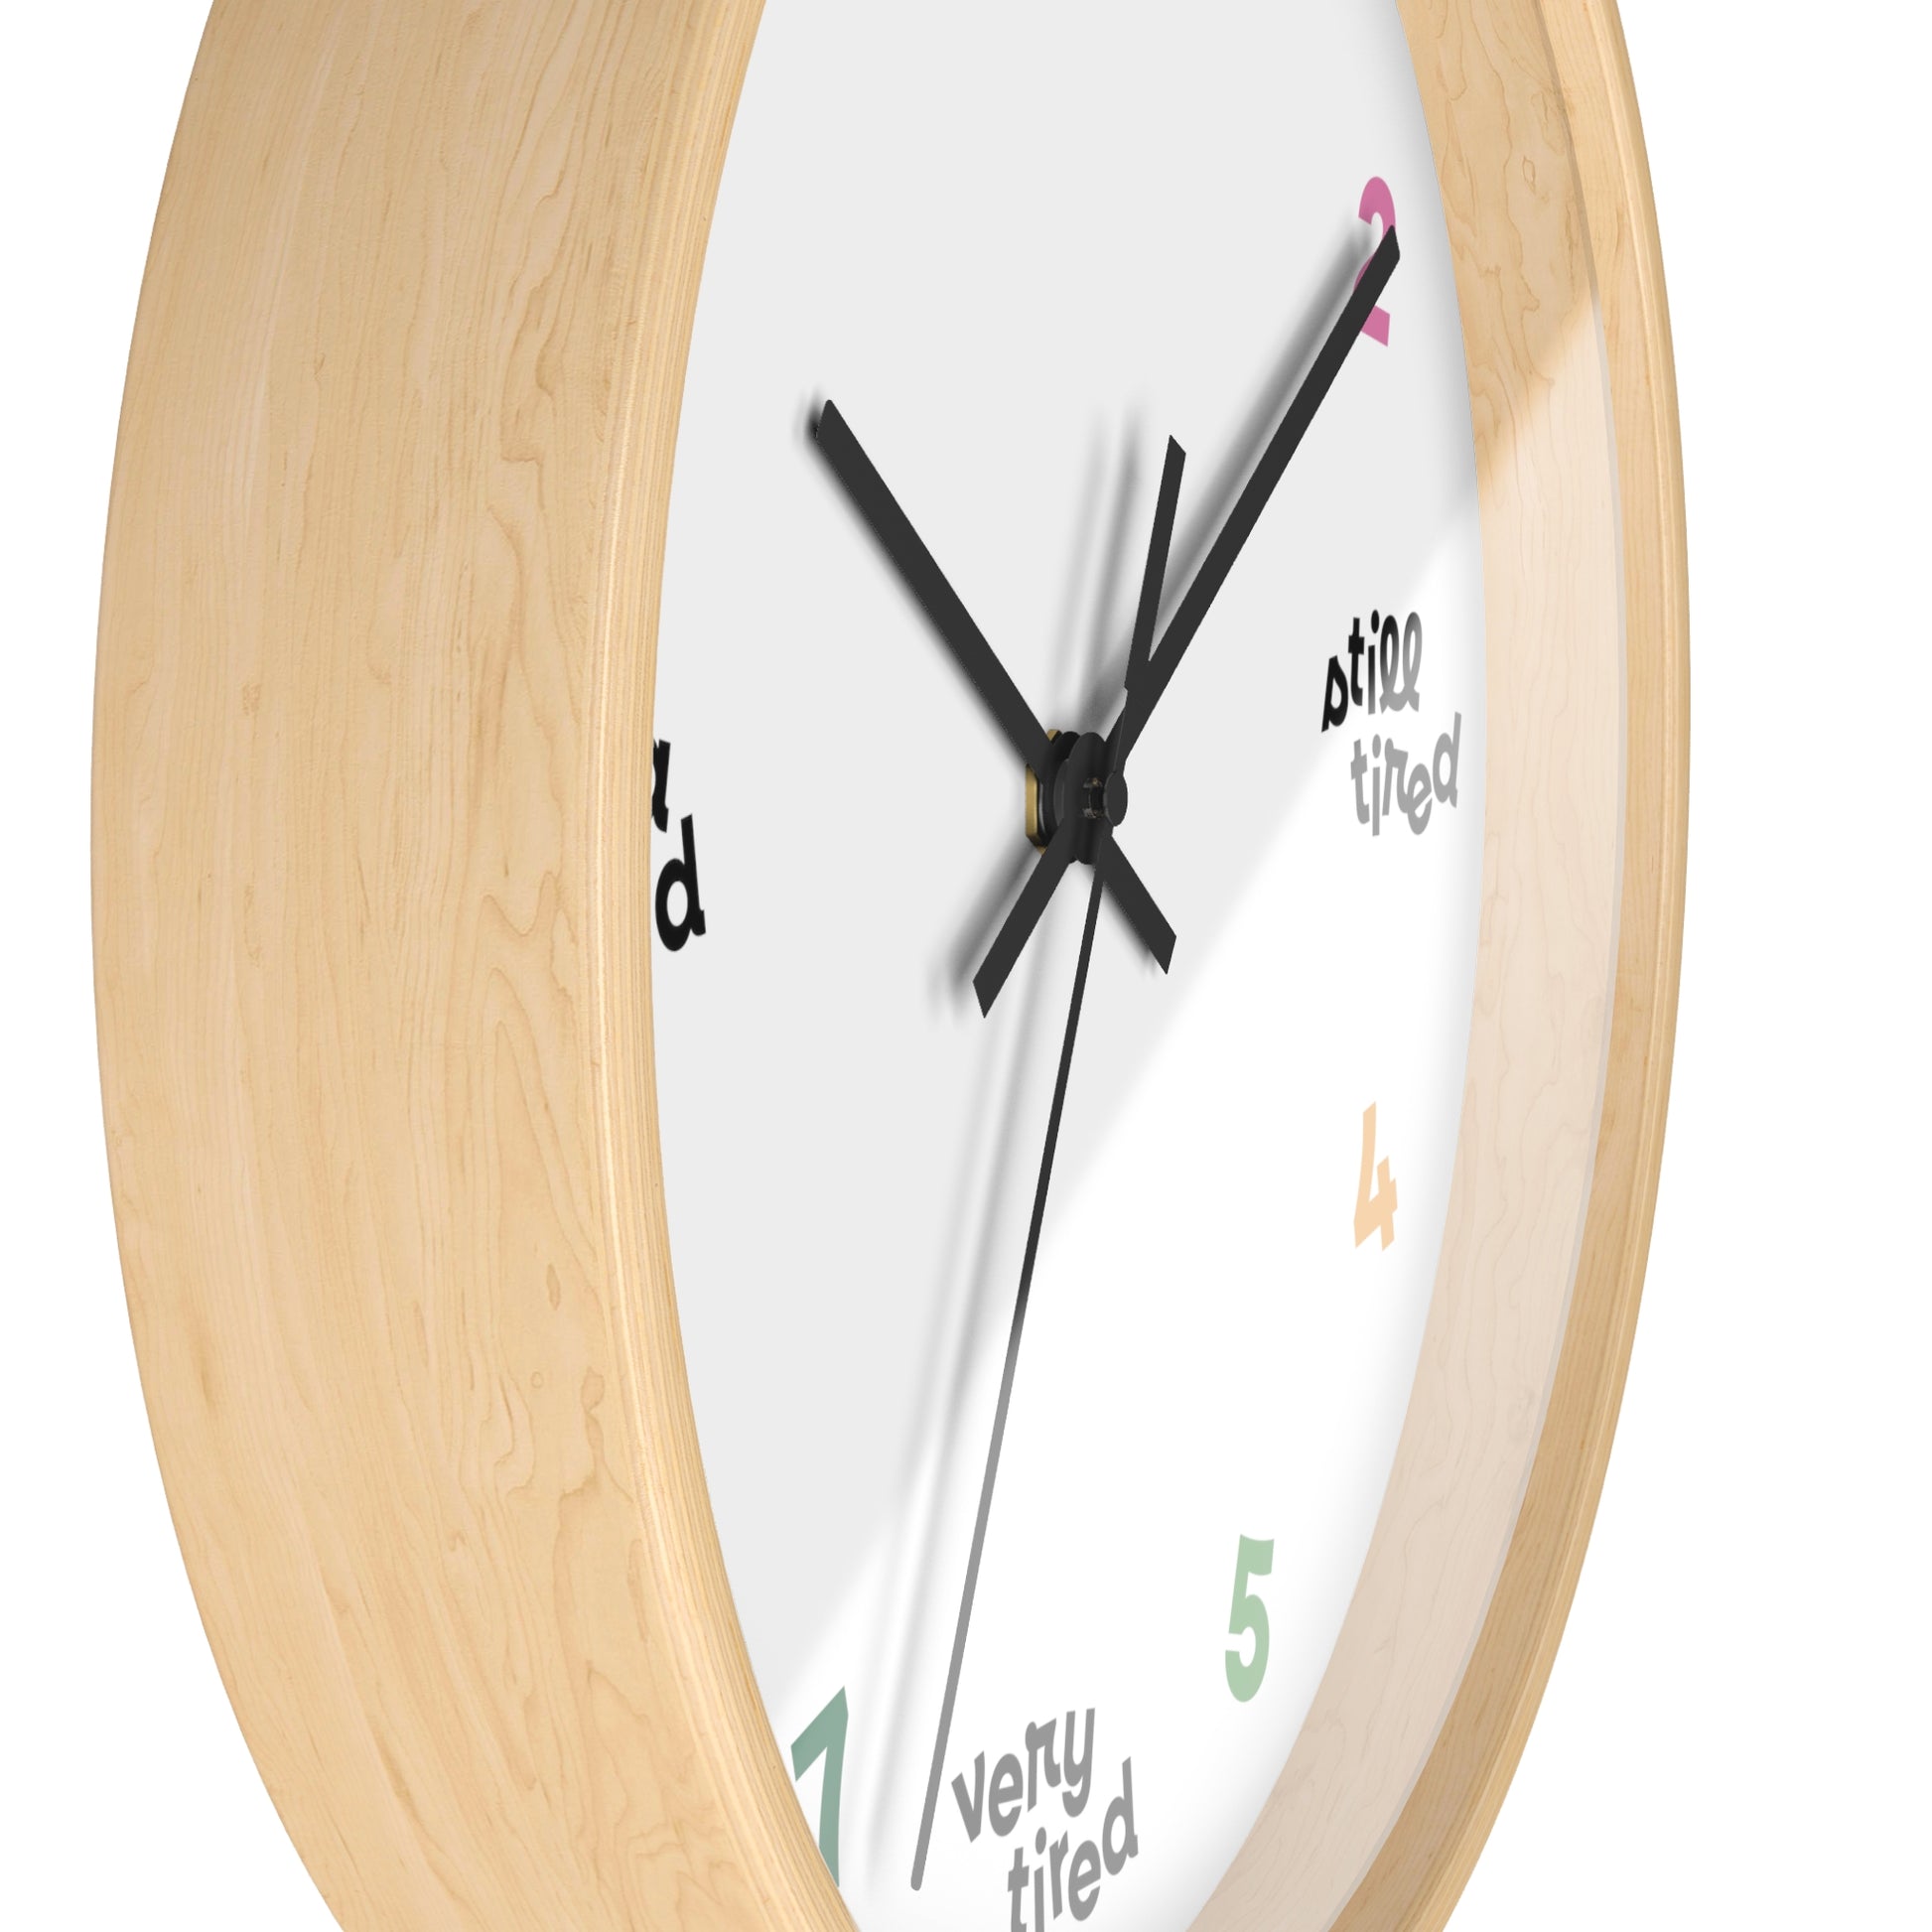 Hanging wall clock with a swedish minimal design. On 4 quadrants, there are variations of "tired" instead of the hour markers. The remaining numbers are cheerful bright colors. This clock has a wooden frame. Side view shown.